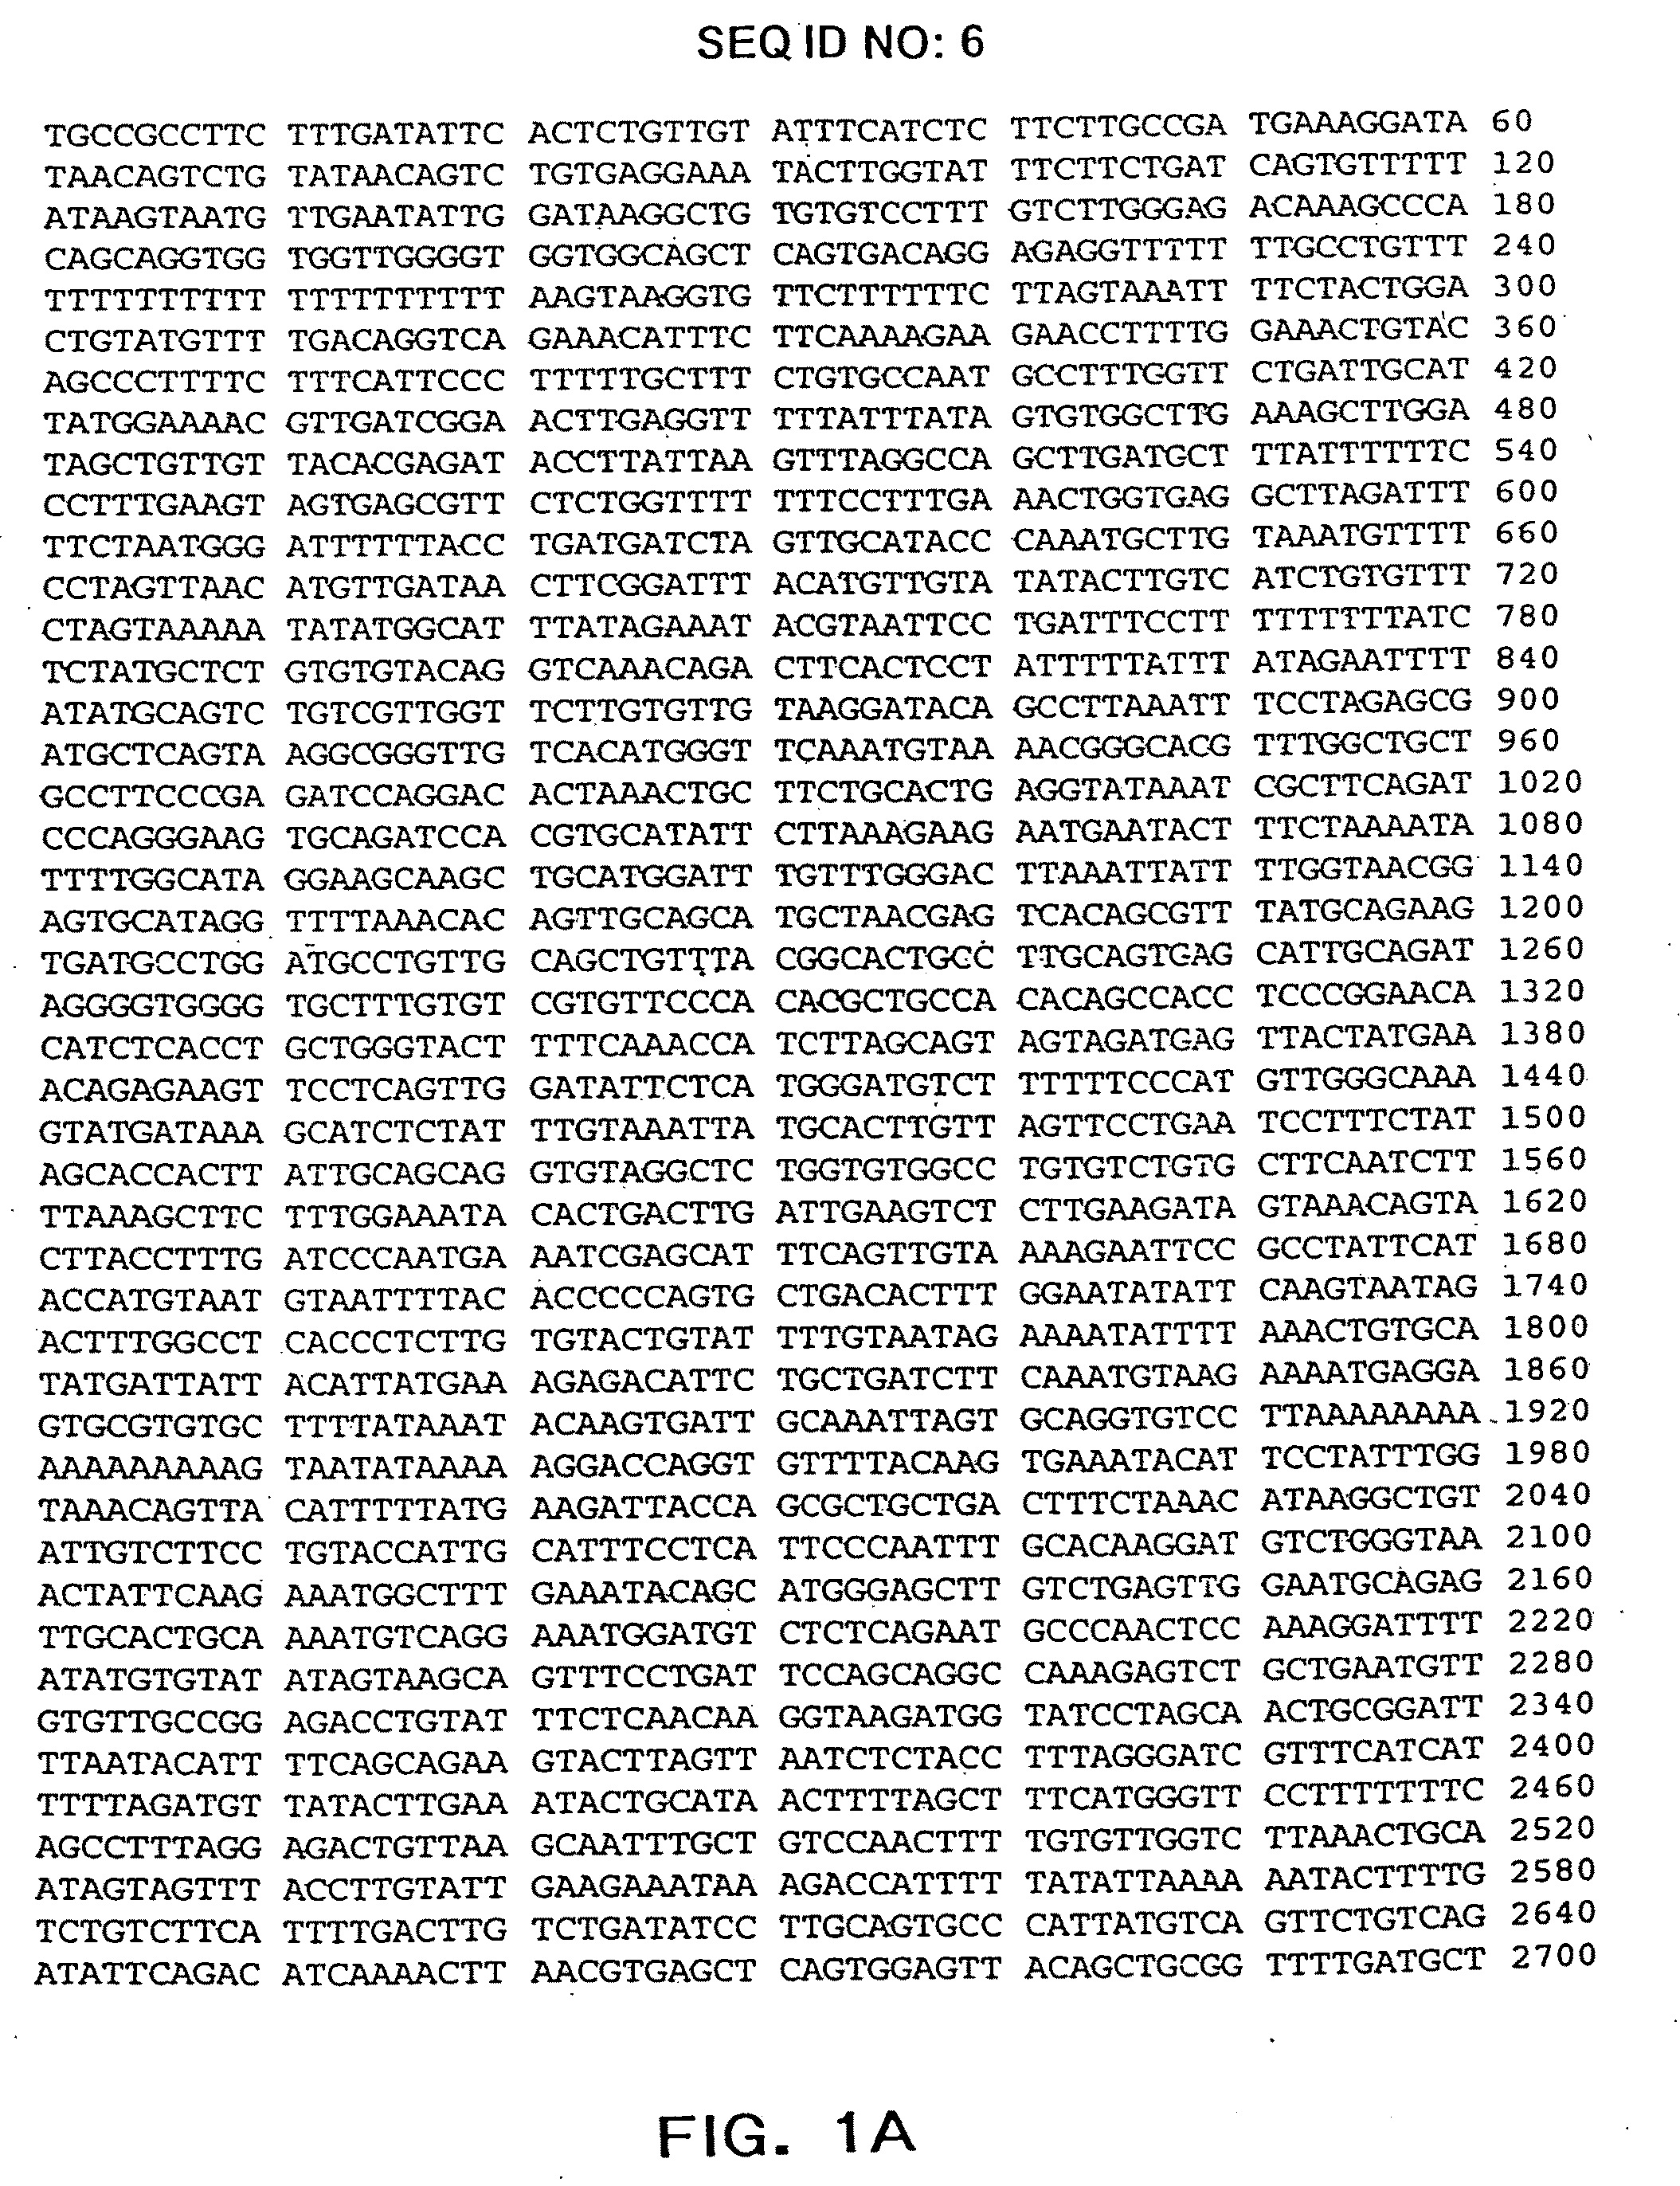 Antibodies produced in the avian oviduct